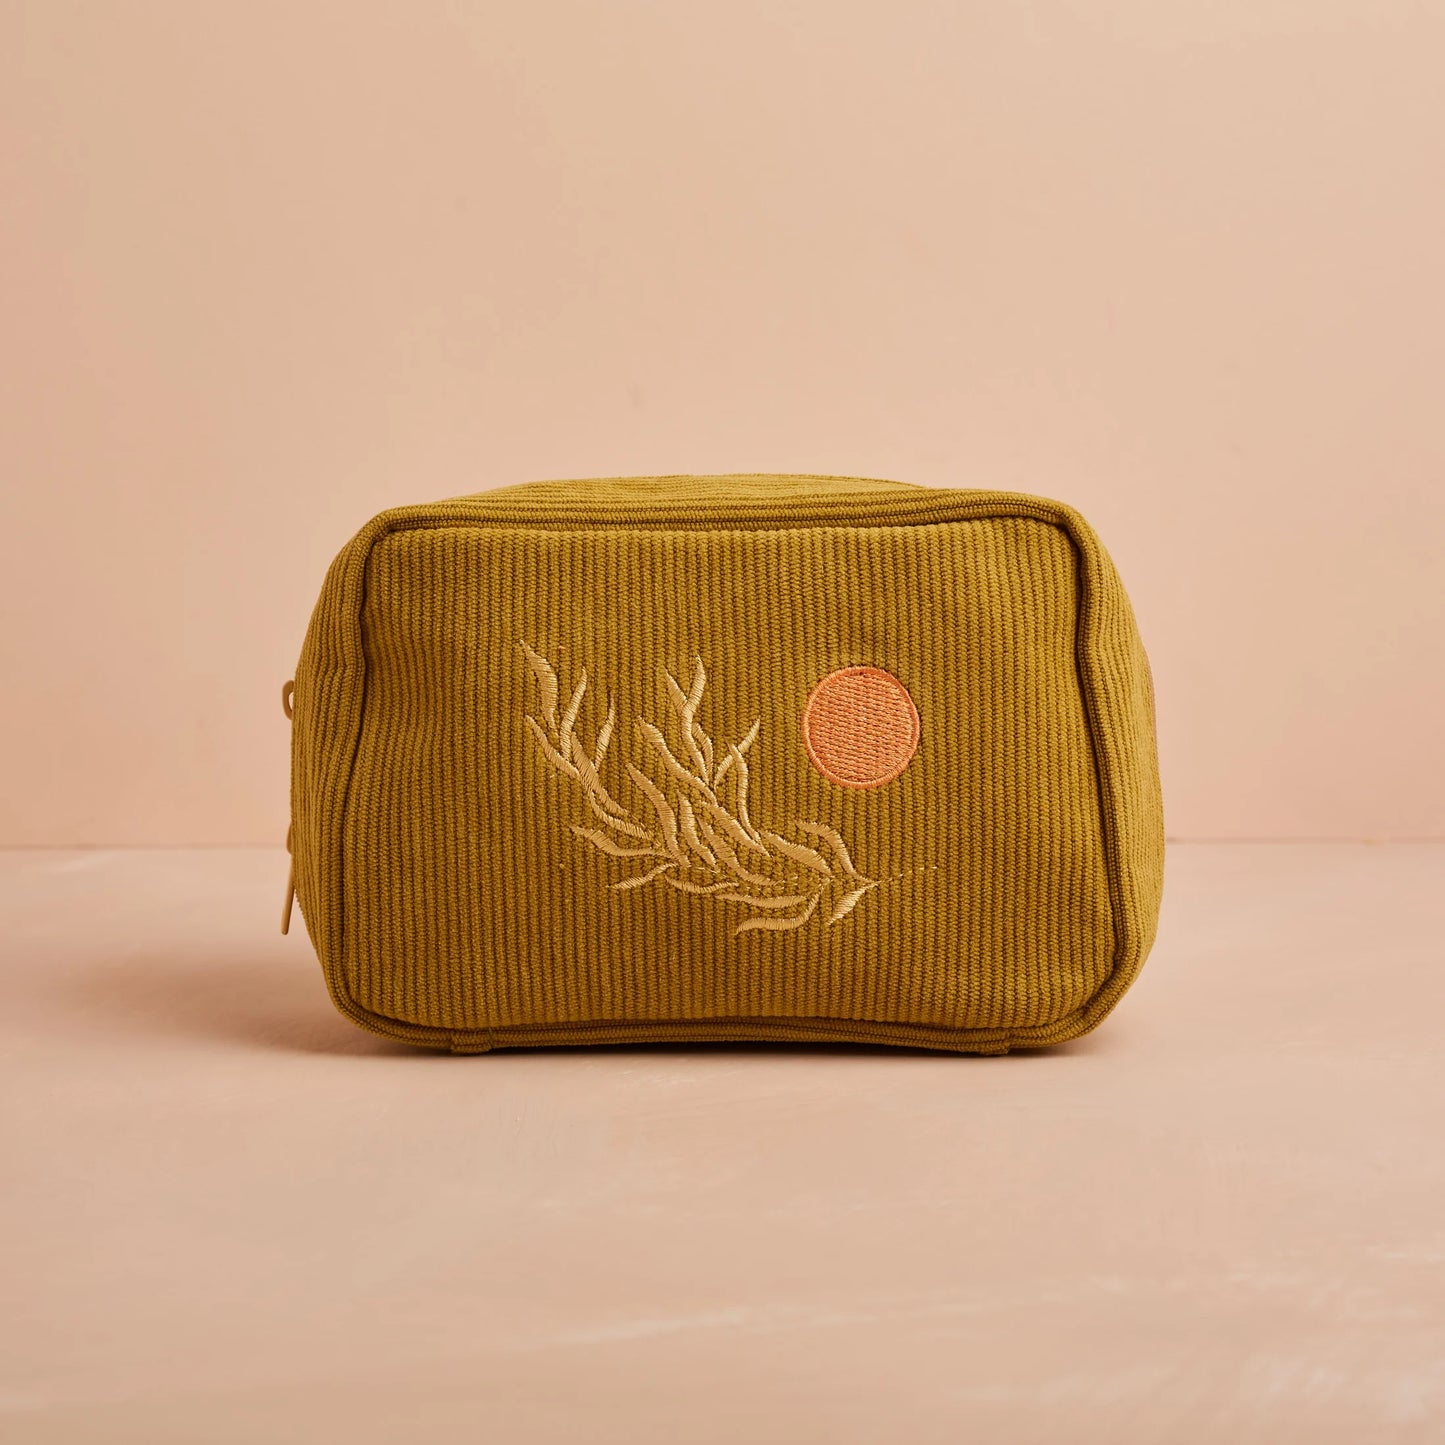 Corduroy Make-Up Pouch in Olive